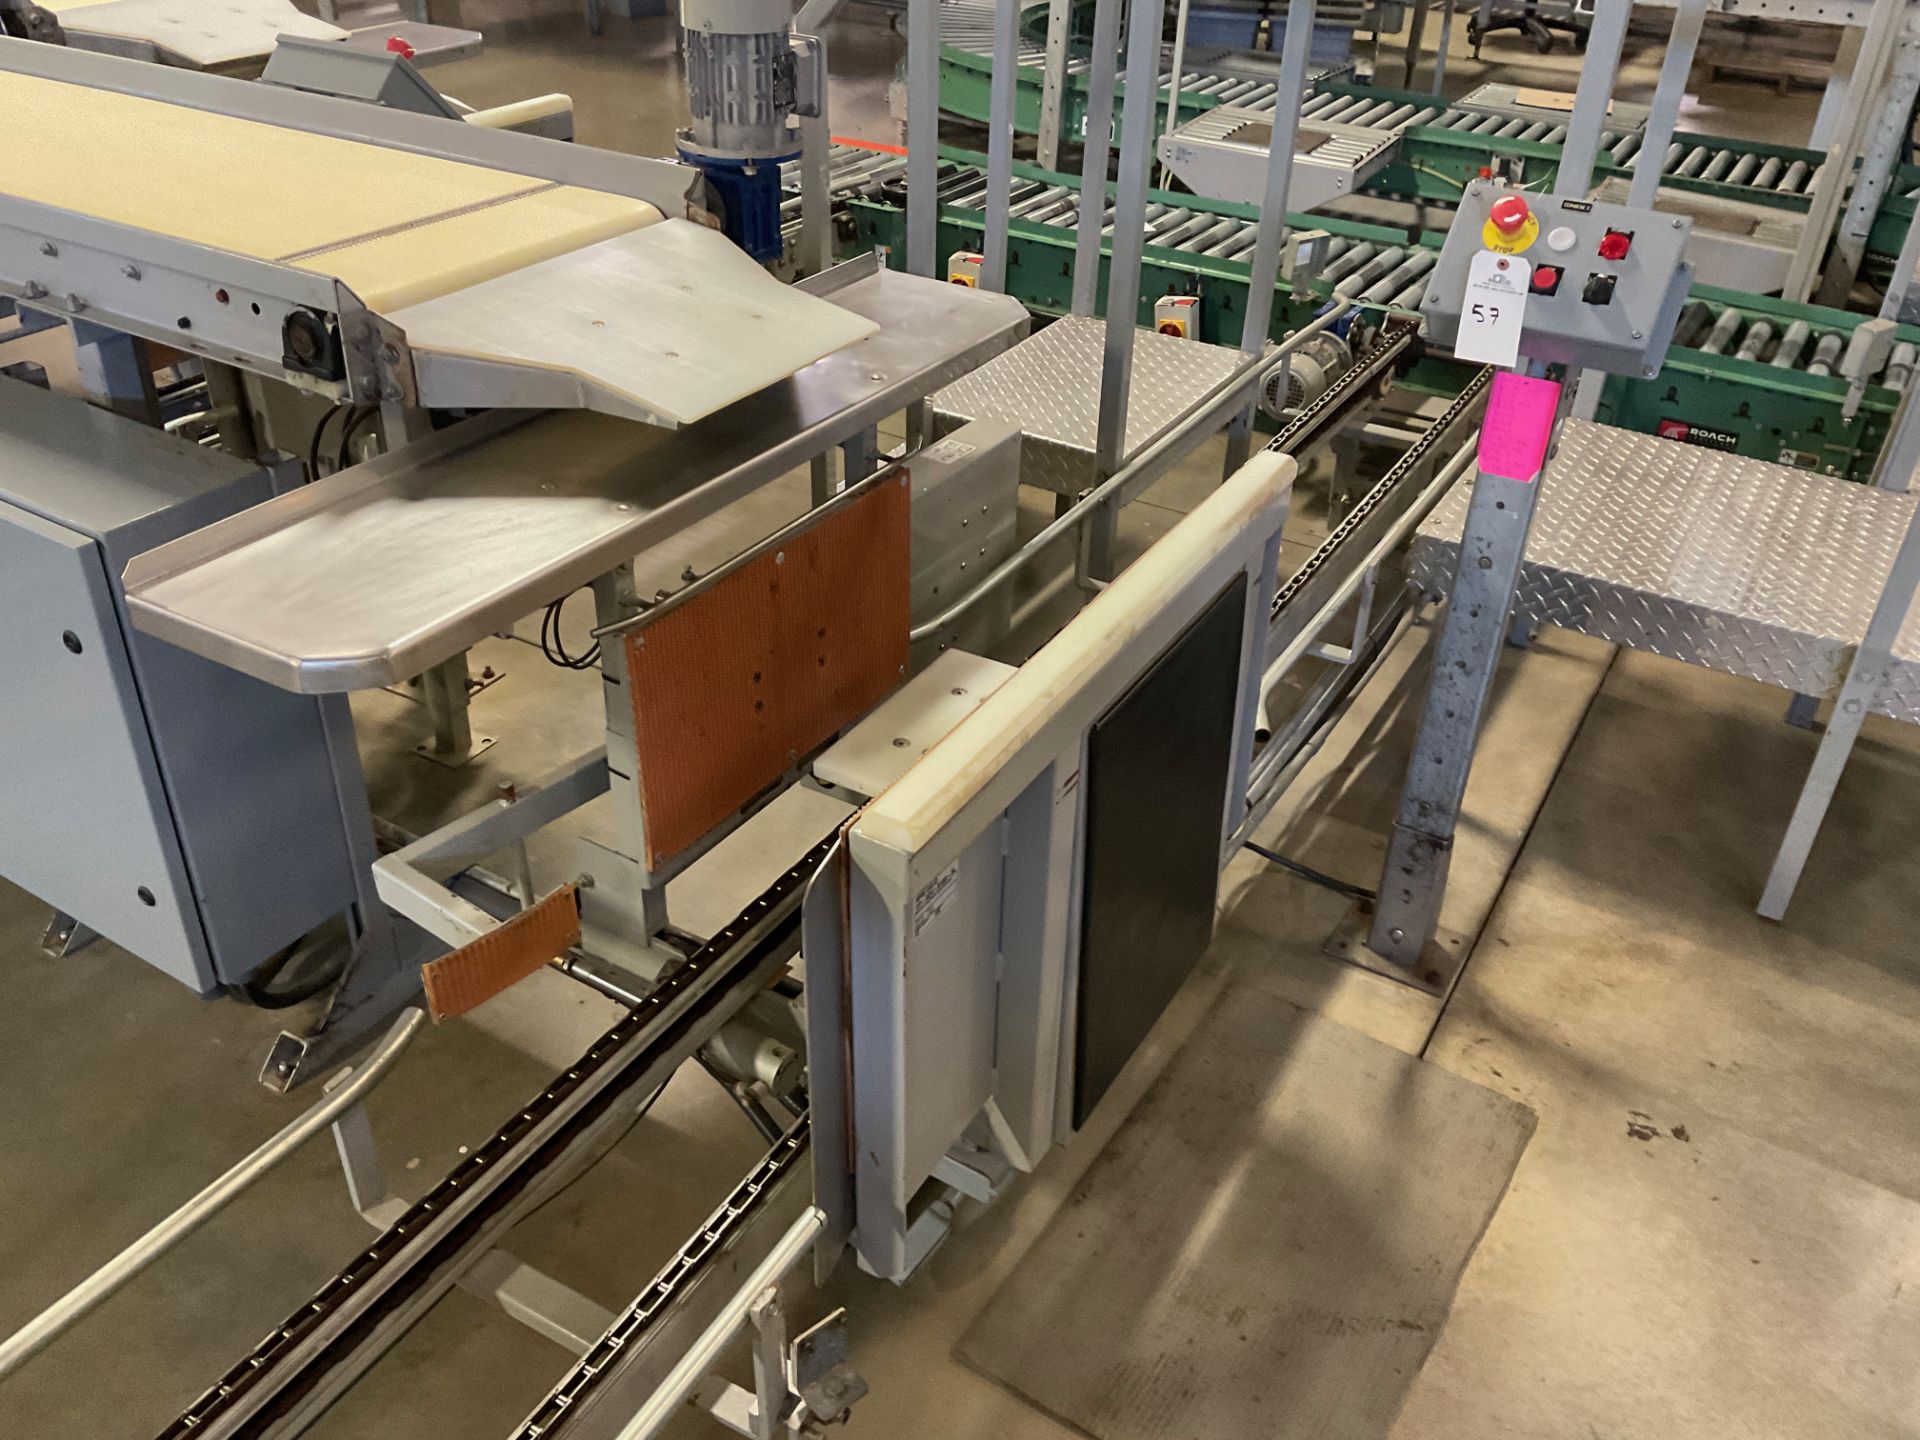 Tray Lifter & Chain Conveyor Section, Approx Dims: 20in W Belt x 7ft - Subj to Bulk | Rig Fee $300